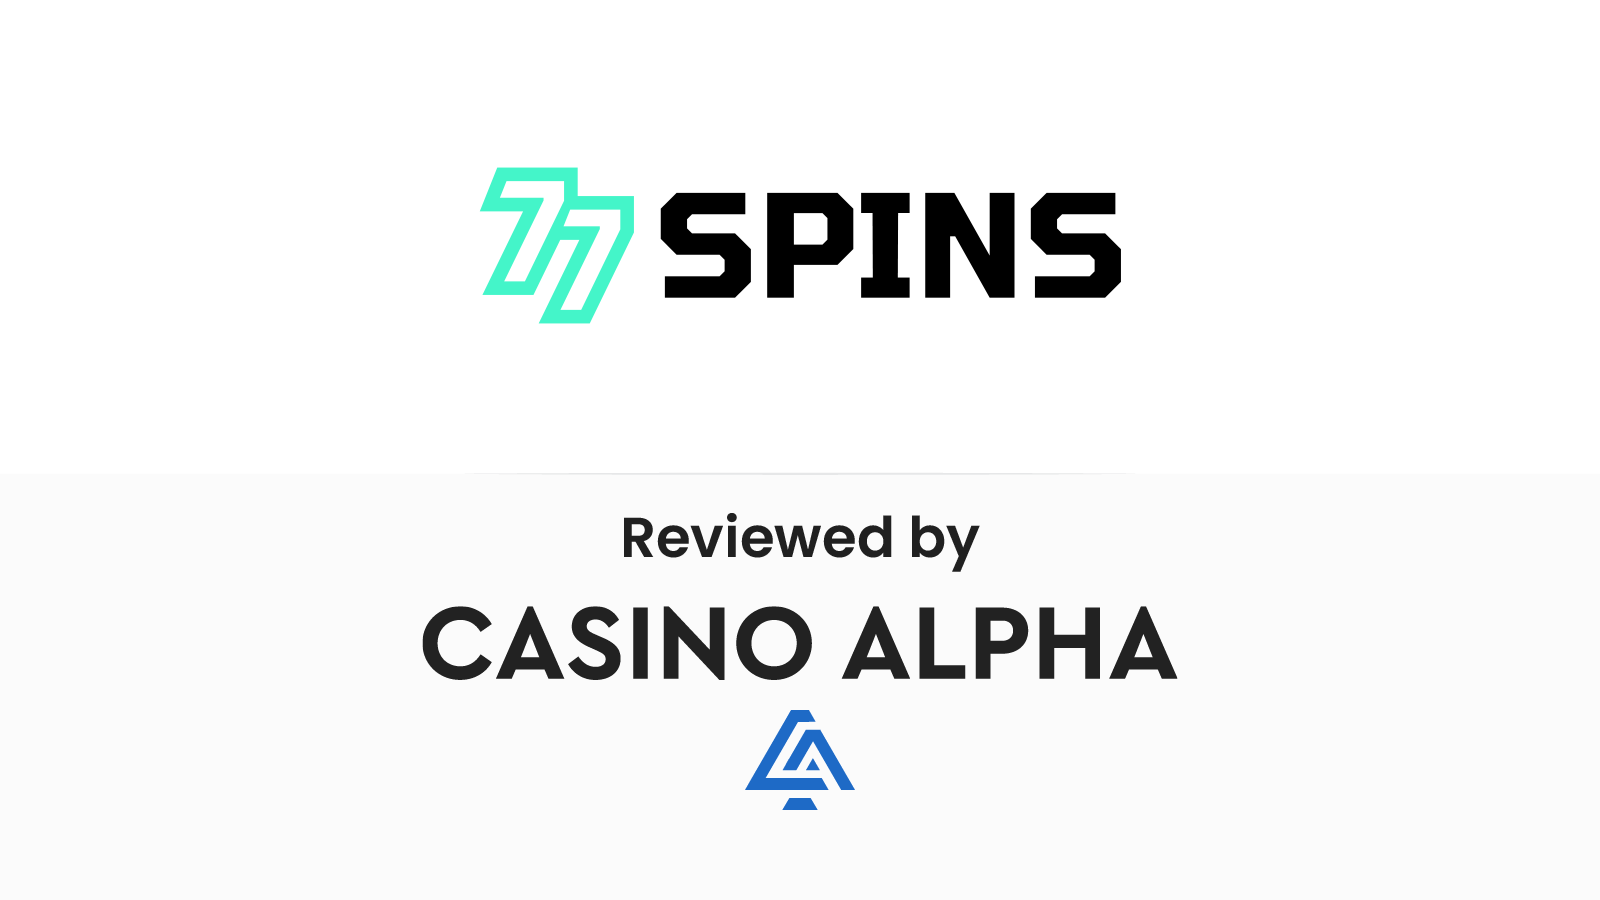 77Spins Casino Review & Coupon codes